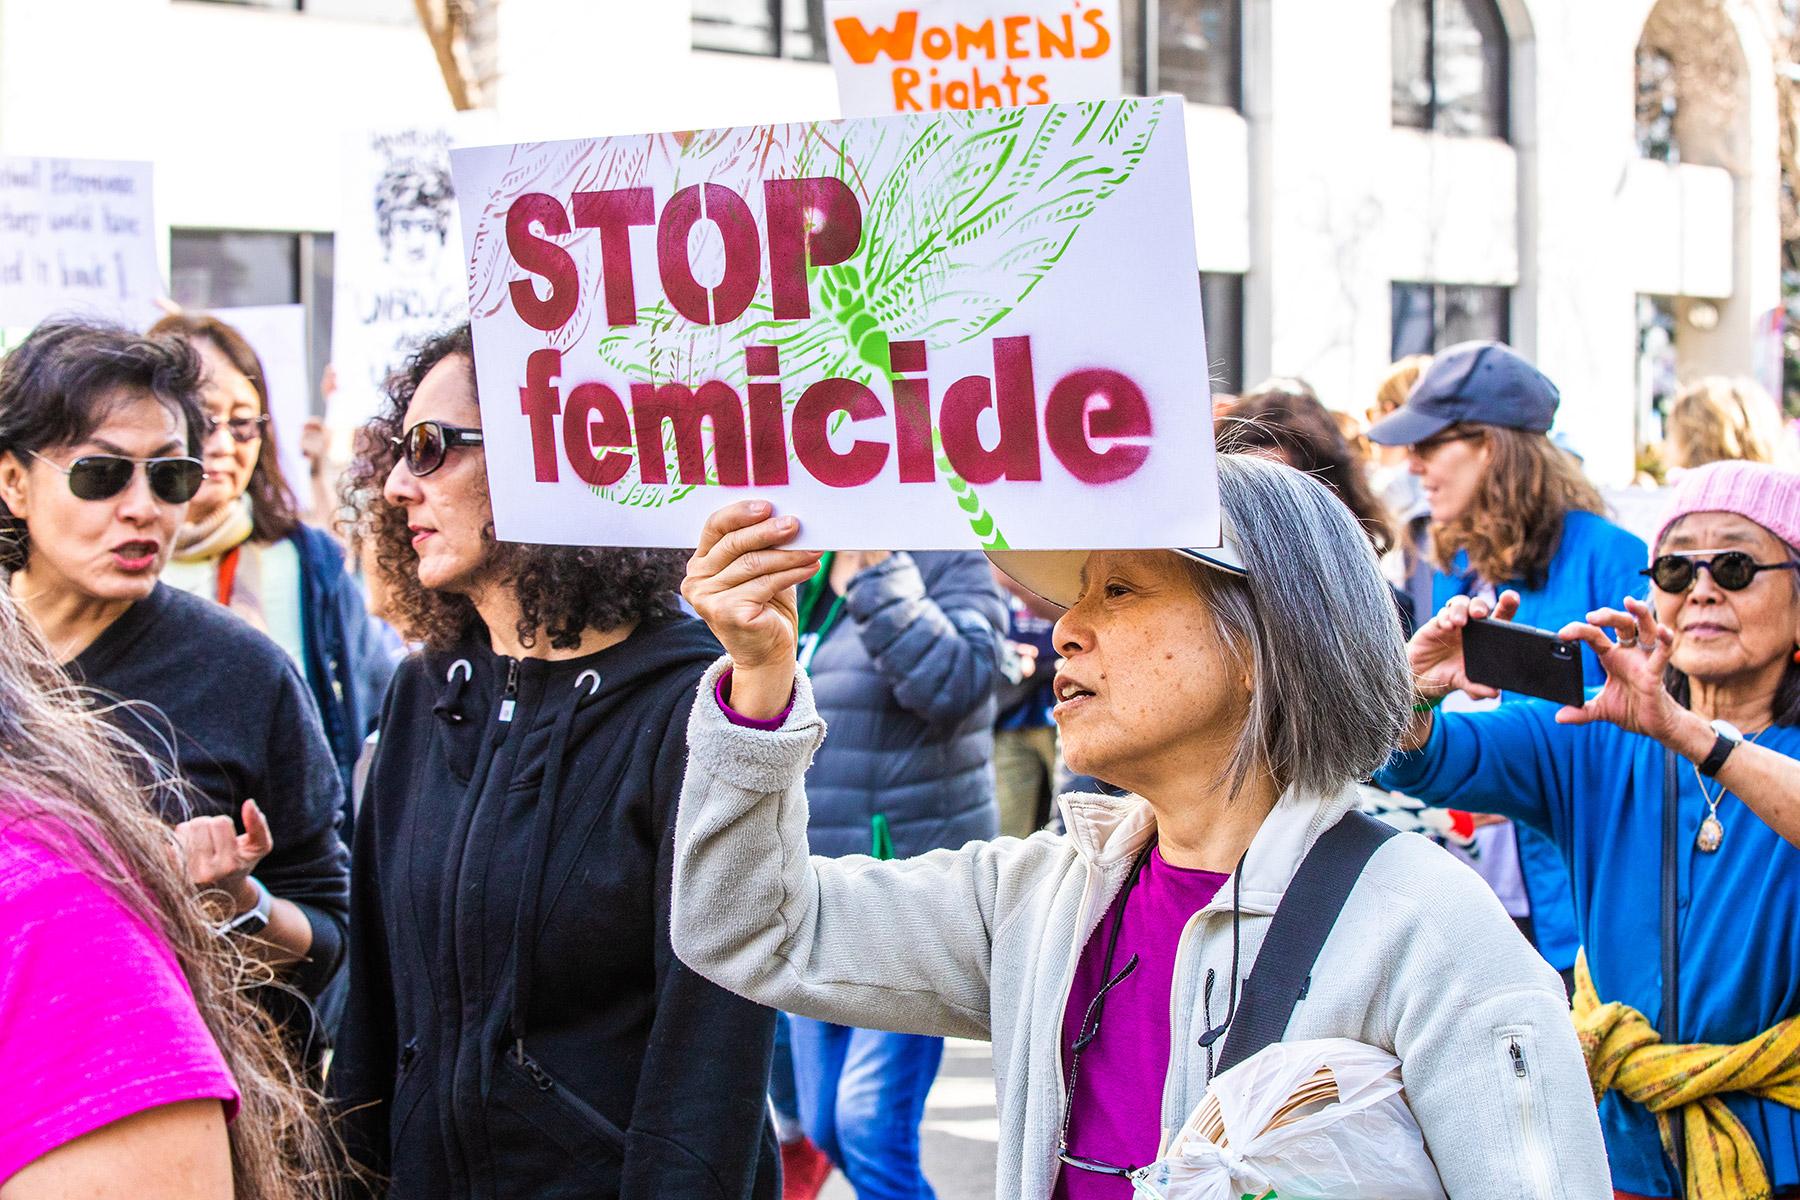 Participants at a women's march in Oakland in 2019. Photo: Thomas Hawk (CC-BY-NC)